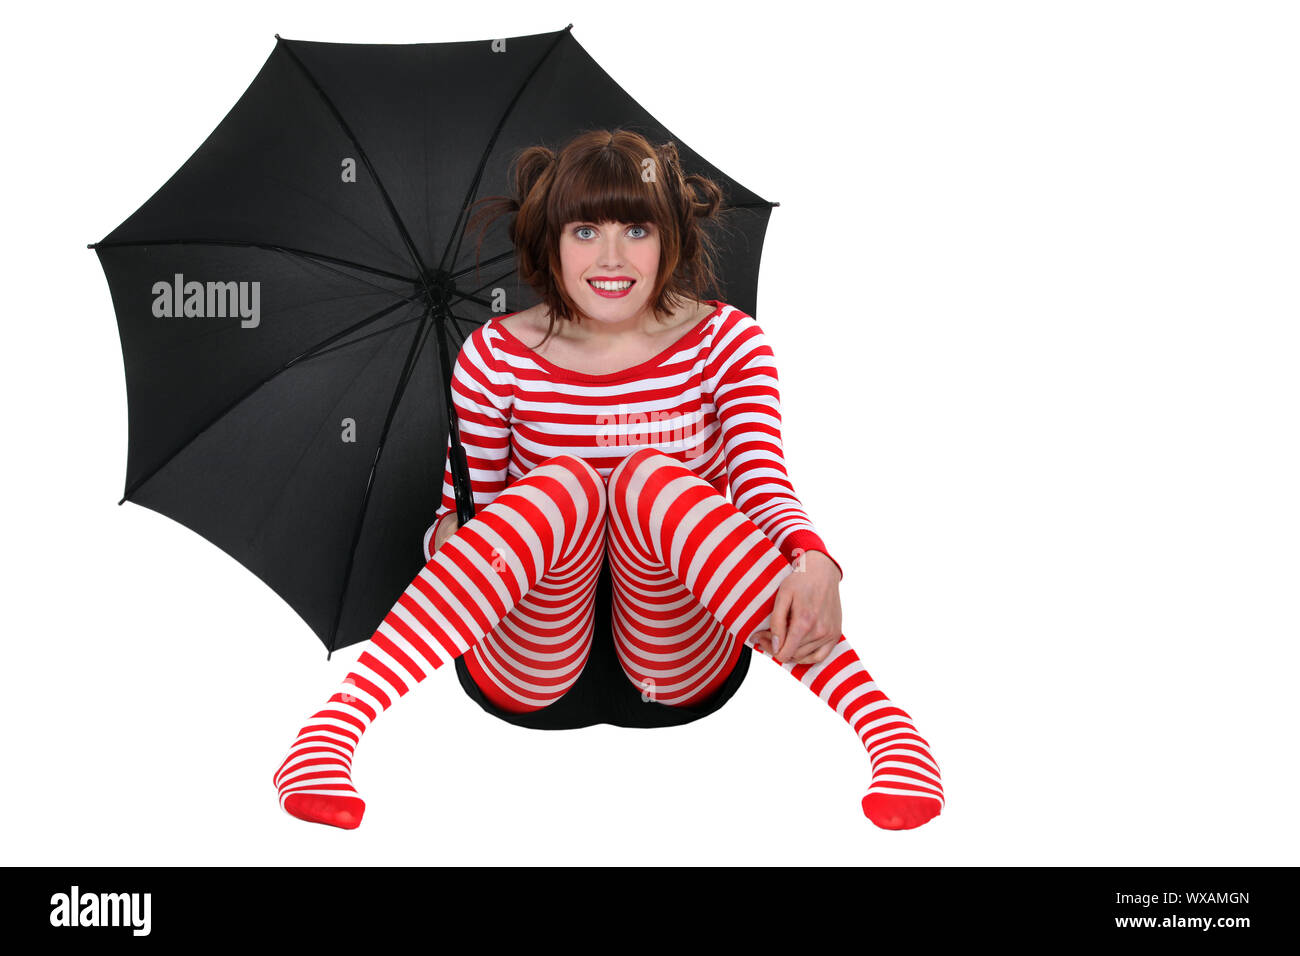 woman in striped clothes holding an umbrella Stock Photo